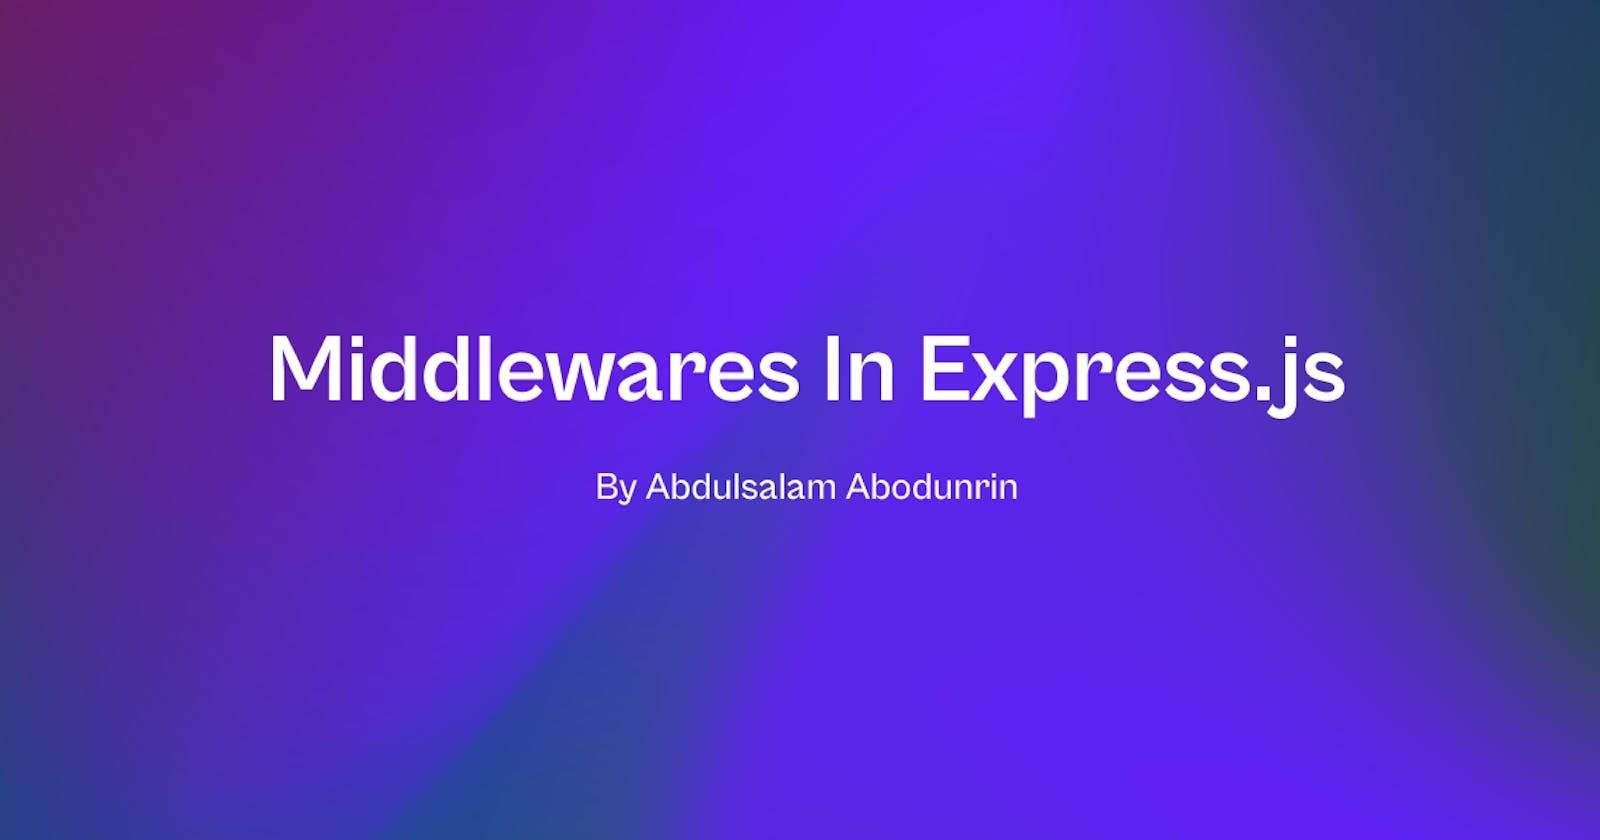 Middlewares in Express.js: All you need to know